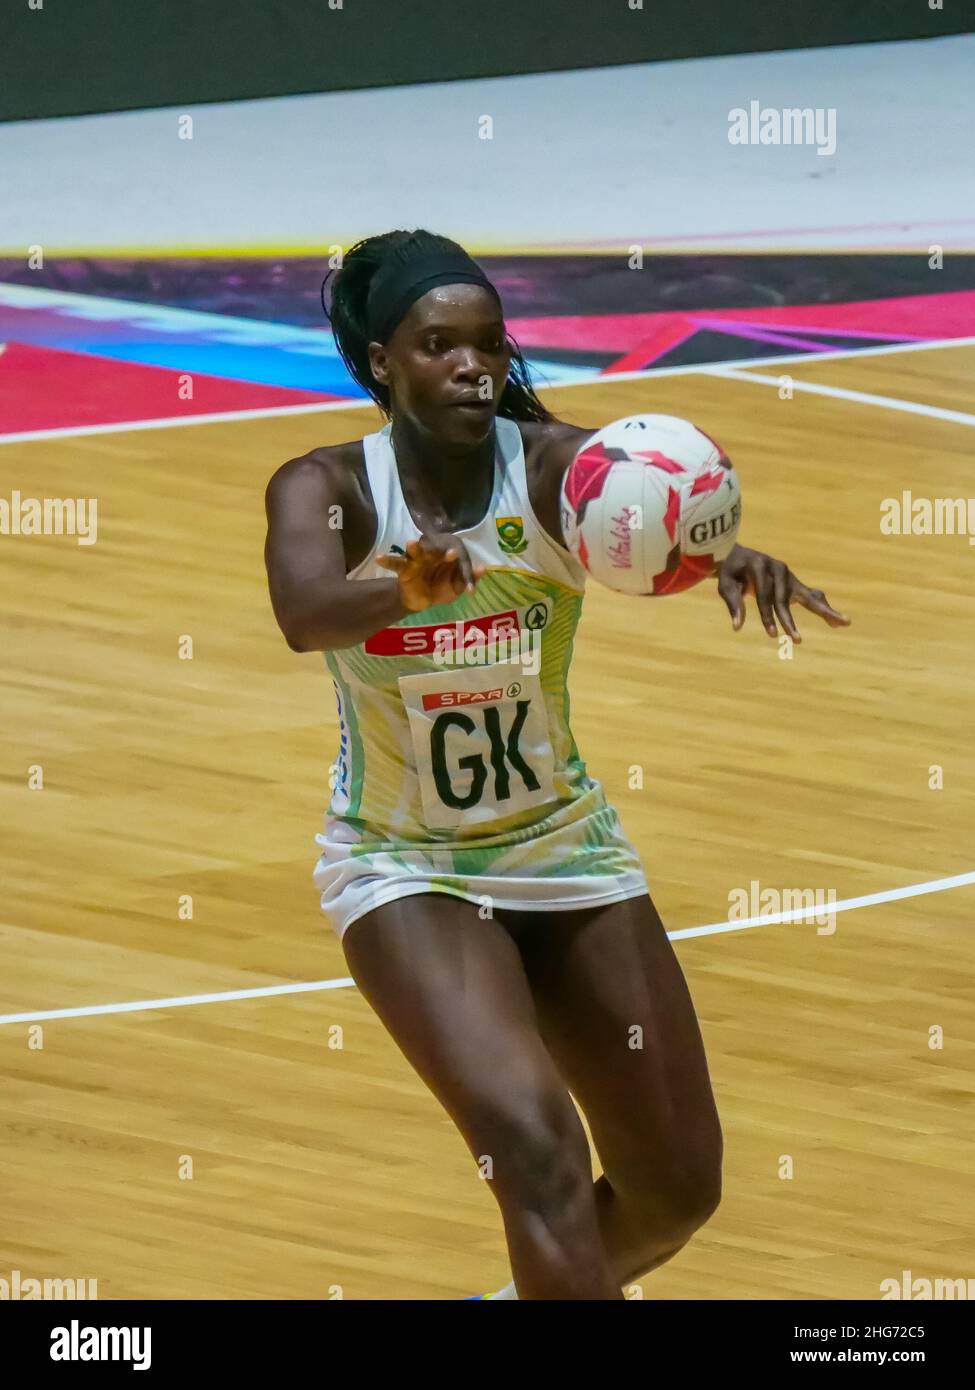 London, UK. 18th Jan, 2022. Copper Box Arena, London, 18th January 2022 Phumza Maweni (GK - South Africa Proteas) passes the ball in the match between Proteas (South Africa) and Silver Ferns (New Zealand) in the Quad Series at the Copper Box Arena, London on 18th January 2022 Claire Jeffrey/SPP Credit: SPP Sport Press Photo. /Alamy Live News Stock Photo